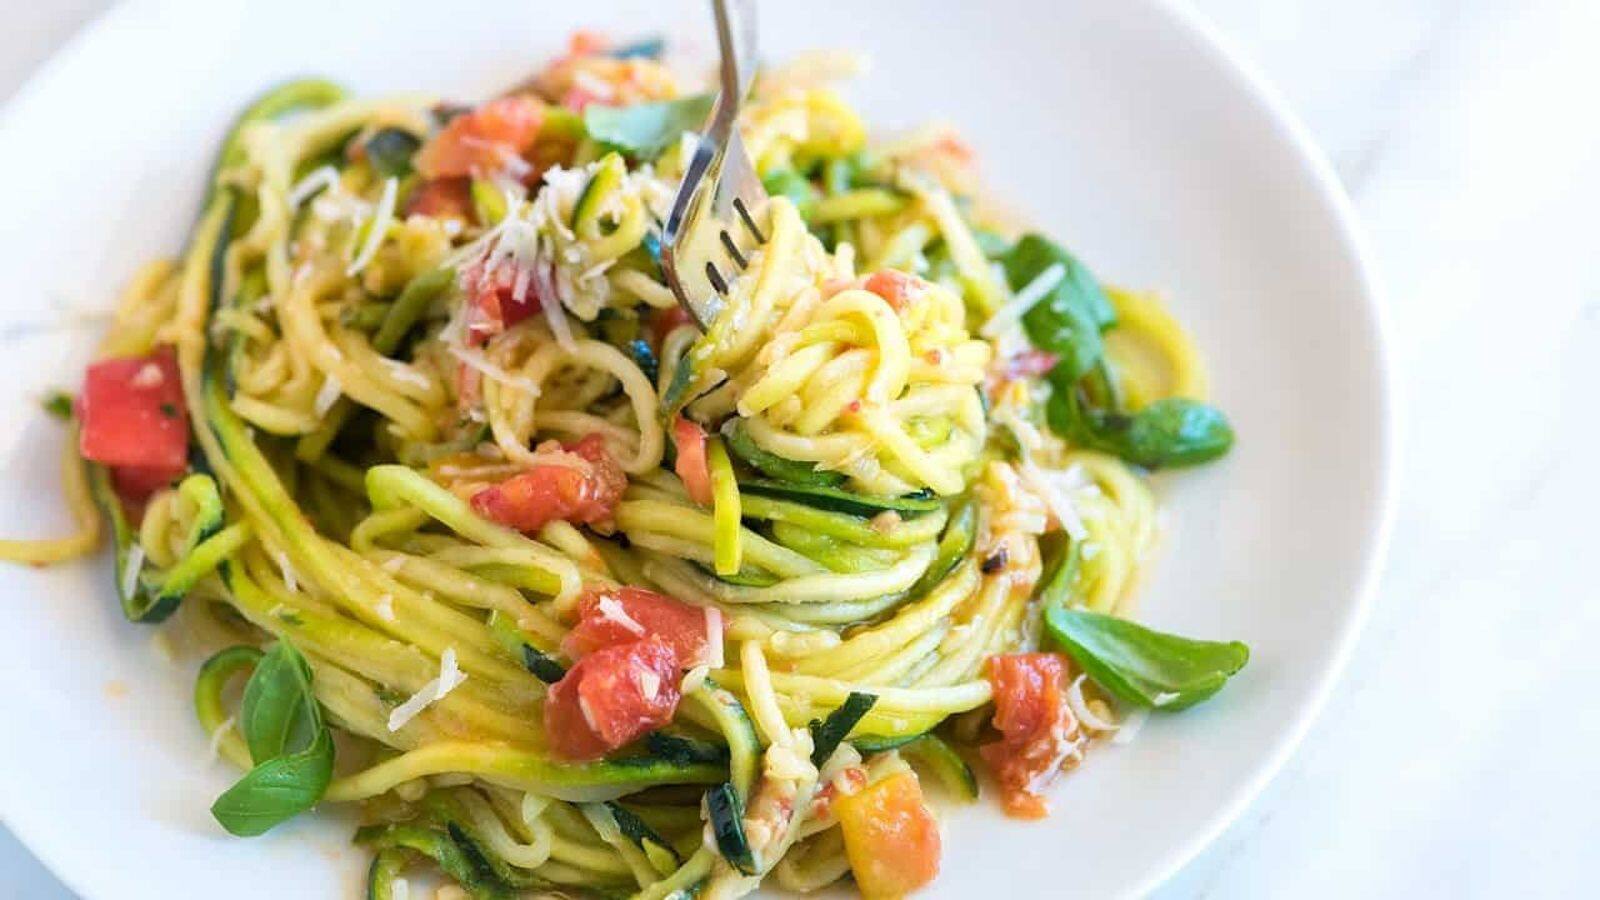 Gorge on these zesty zucchini vegan noodle dishes